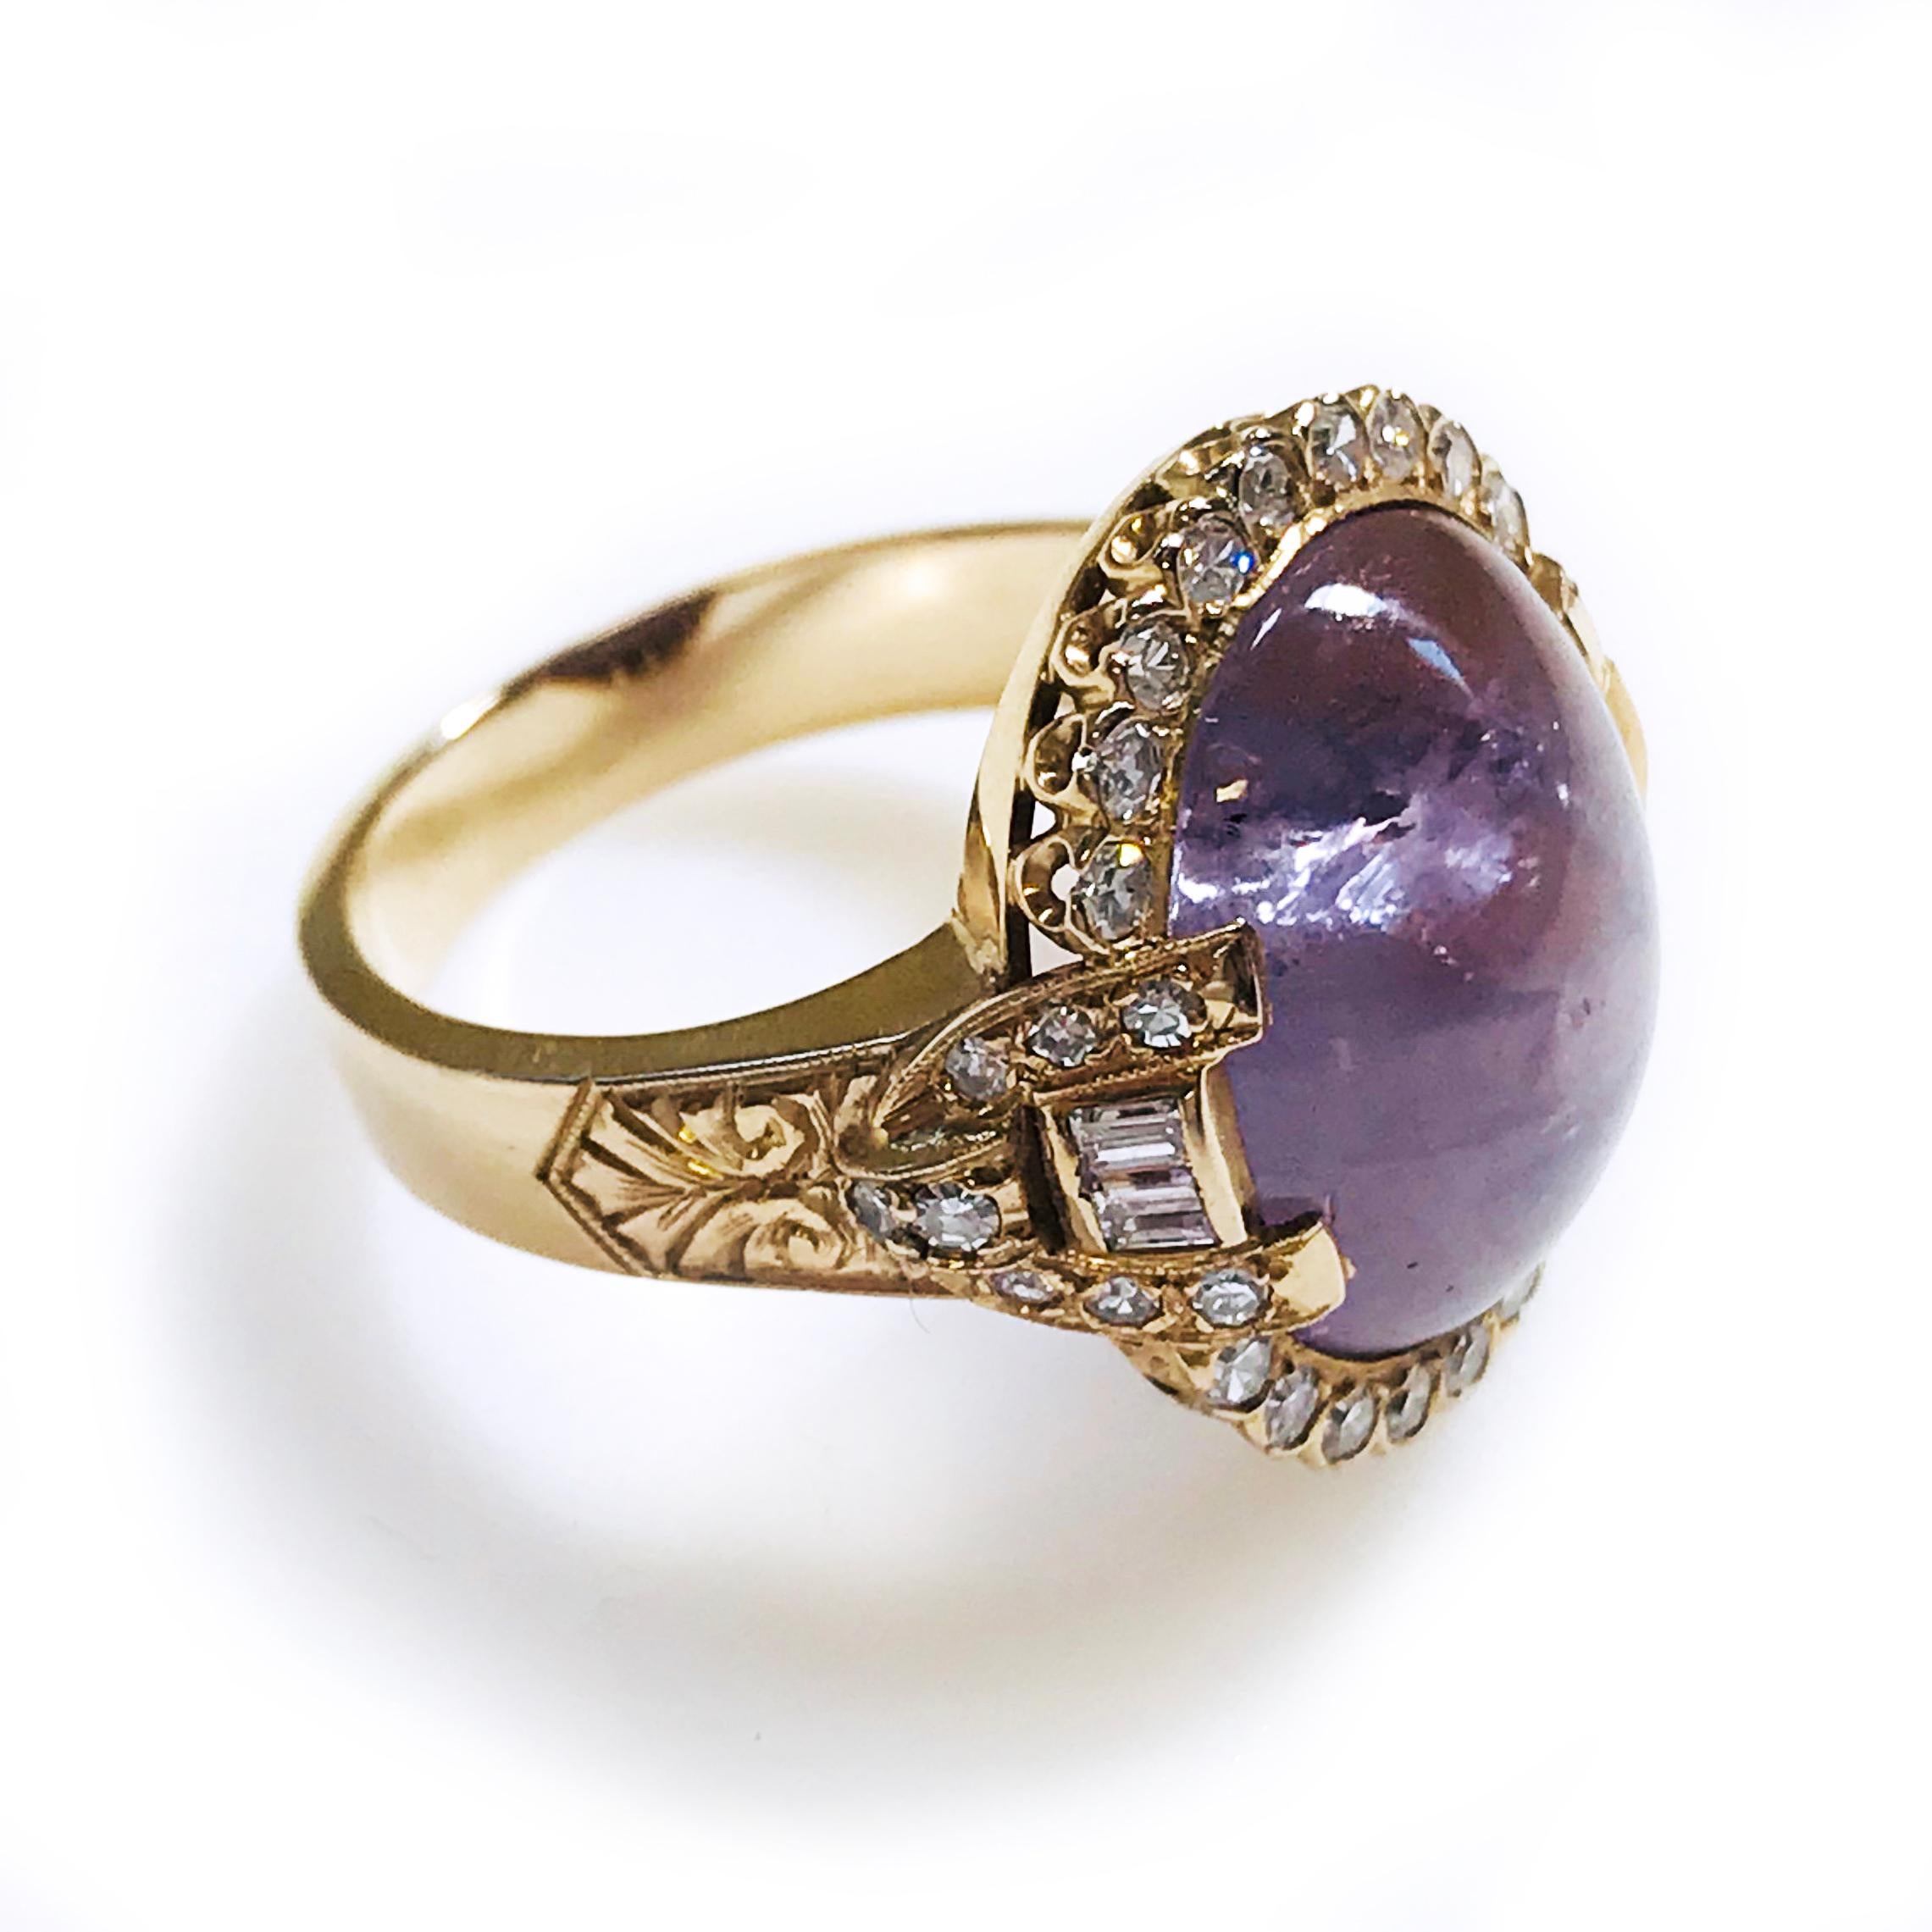 Electronically tested 14k rose gold custom cast purple star sapphire and diamond ring. The featured purple star sapphire is set within a diamond bezel, supported by diamond set shoulders and completed by a three and one-half millimeter wide band.